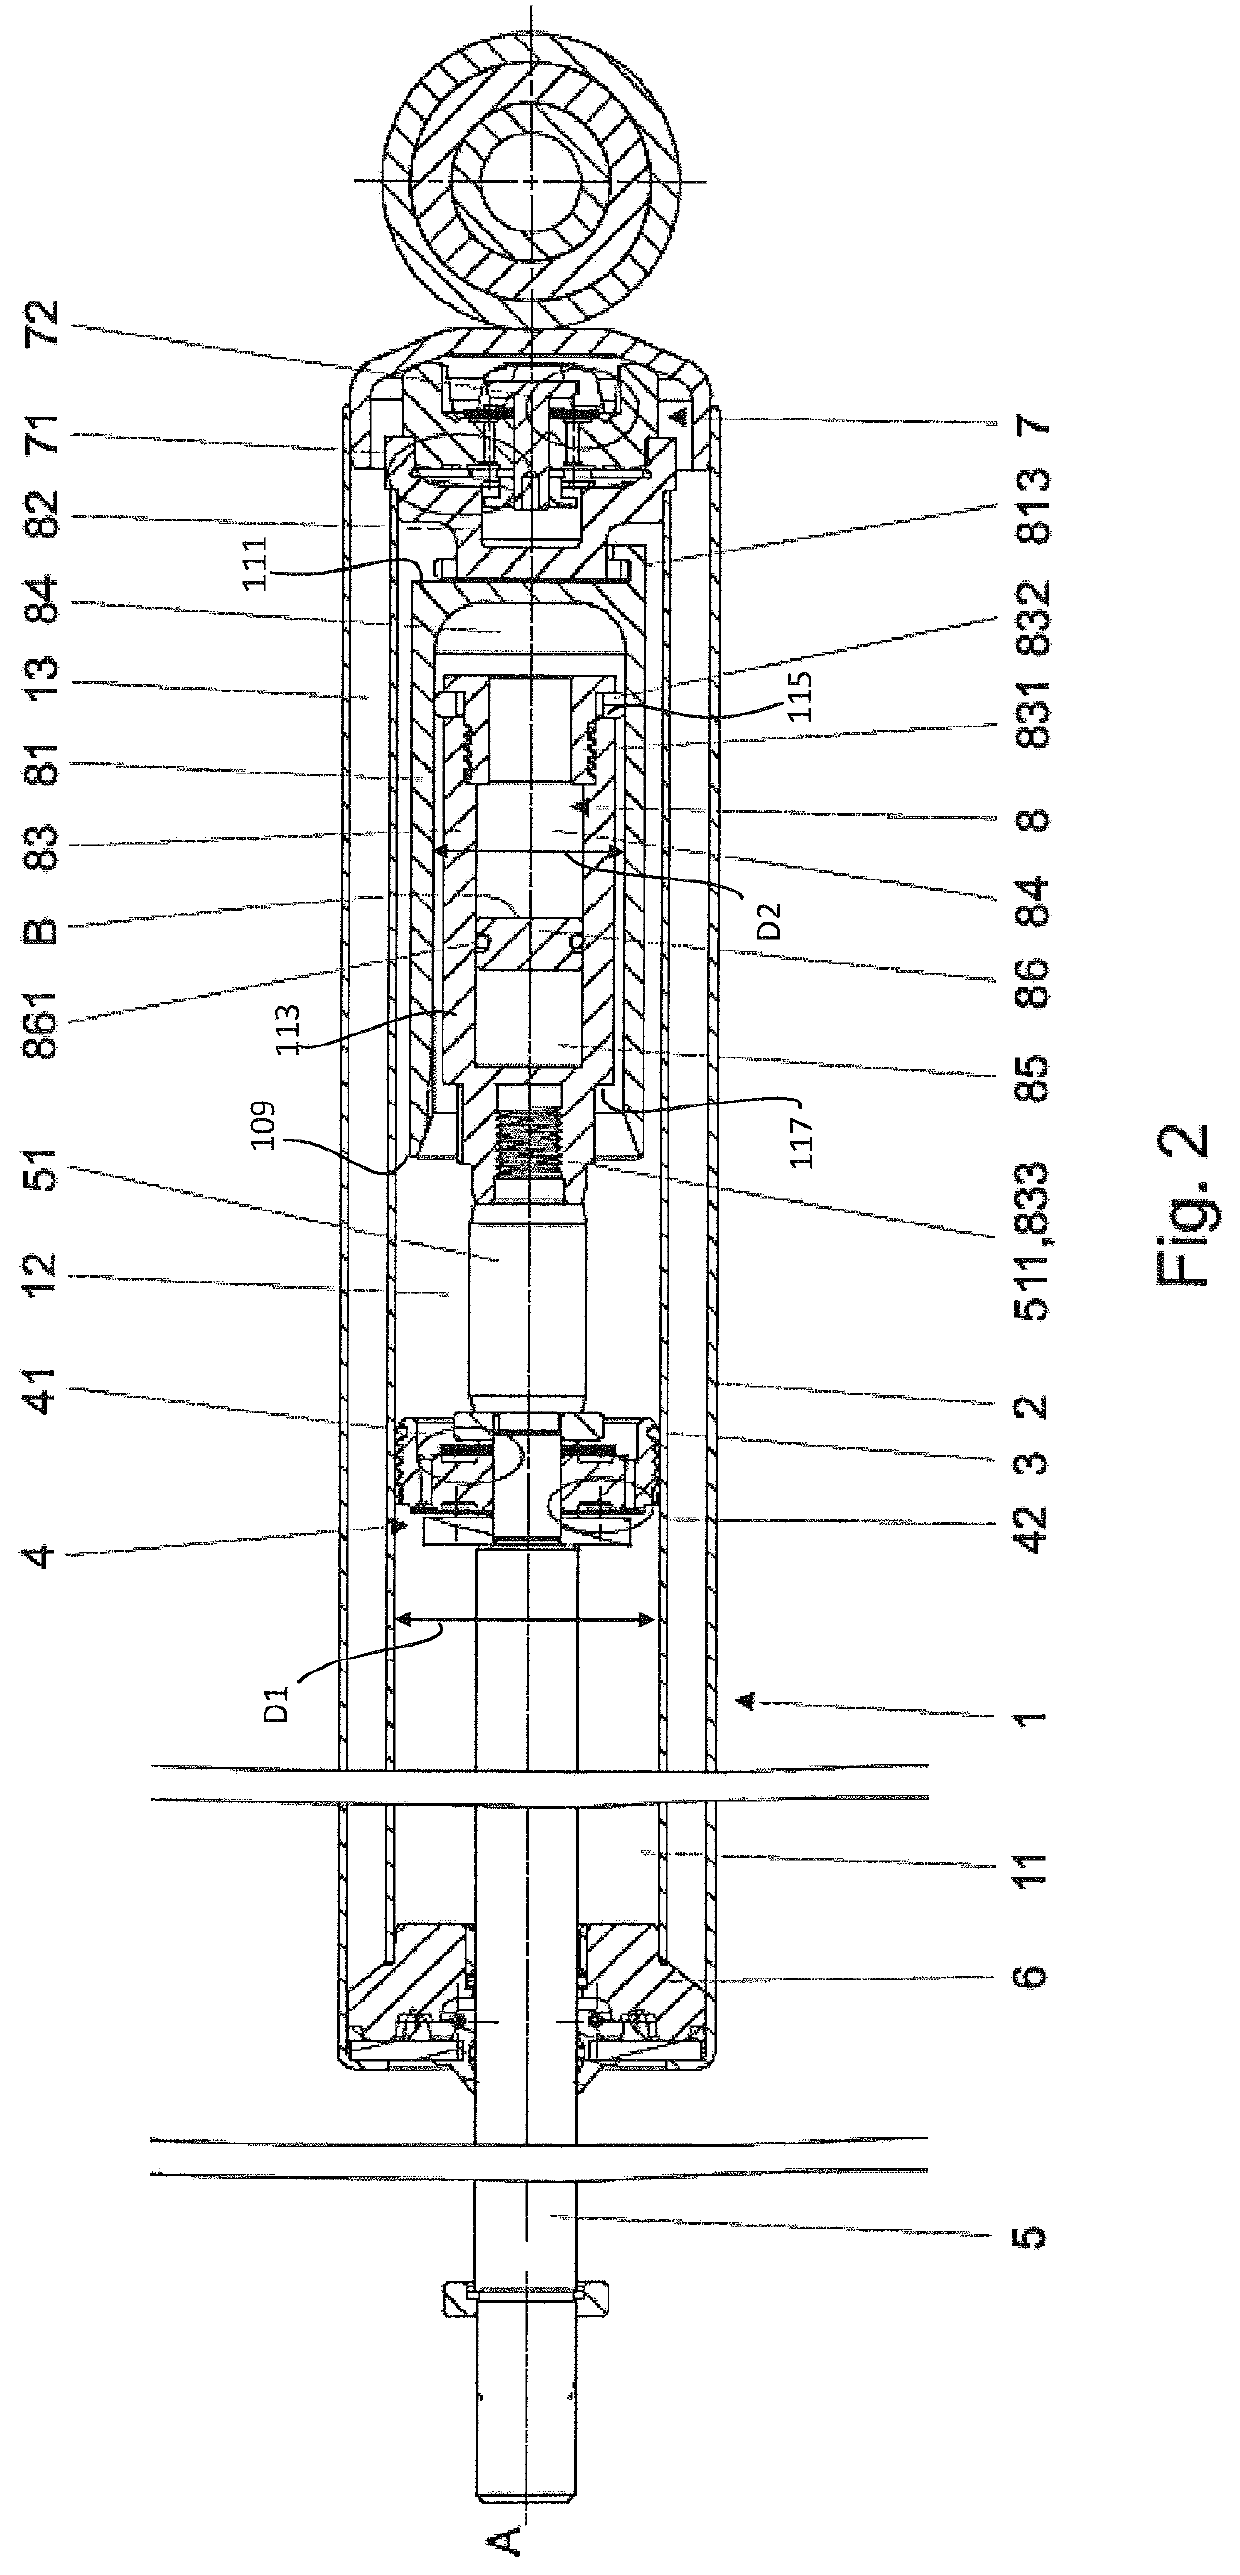 Hydraulic damper with a hydraulic compression stop assembly